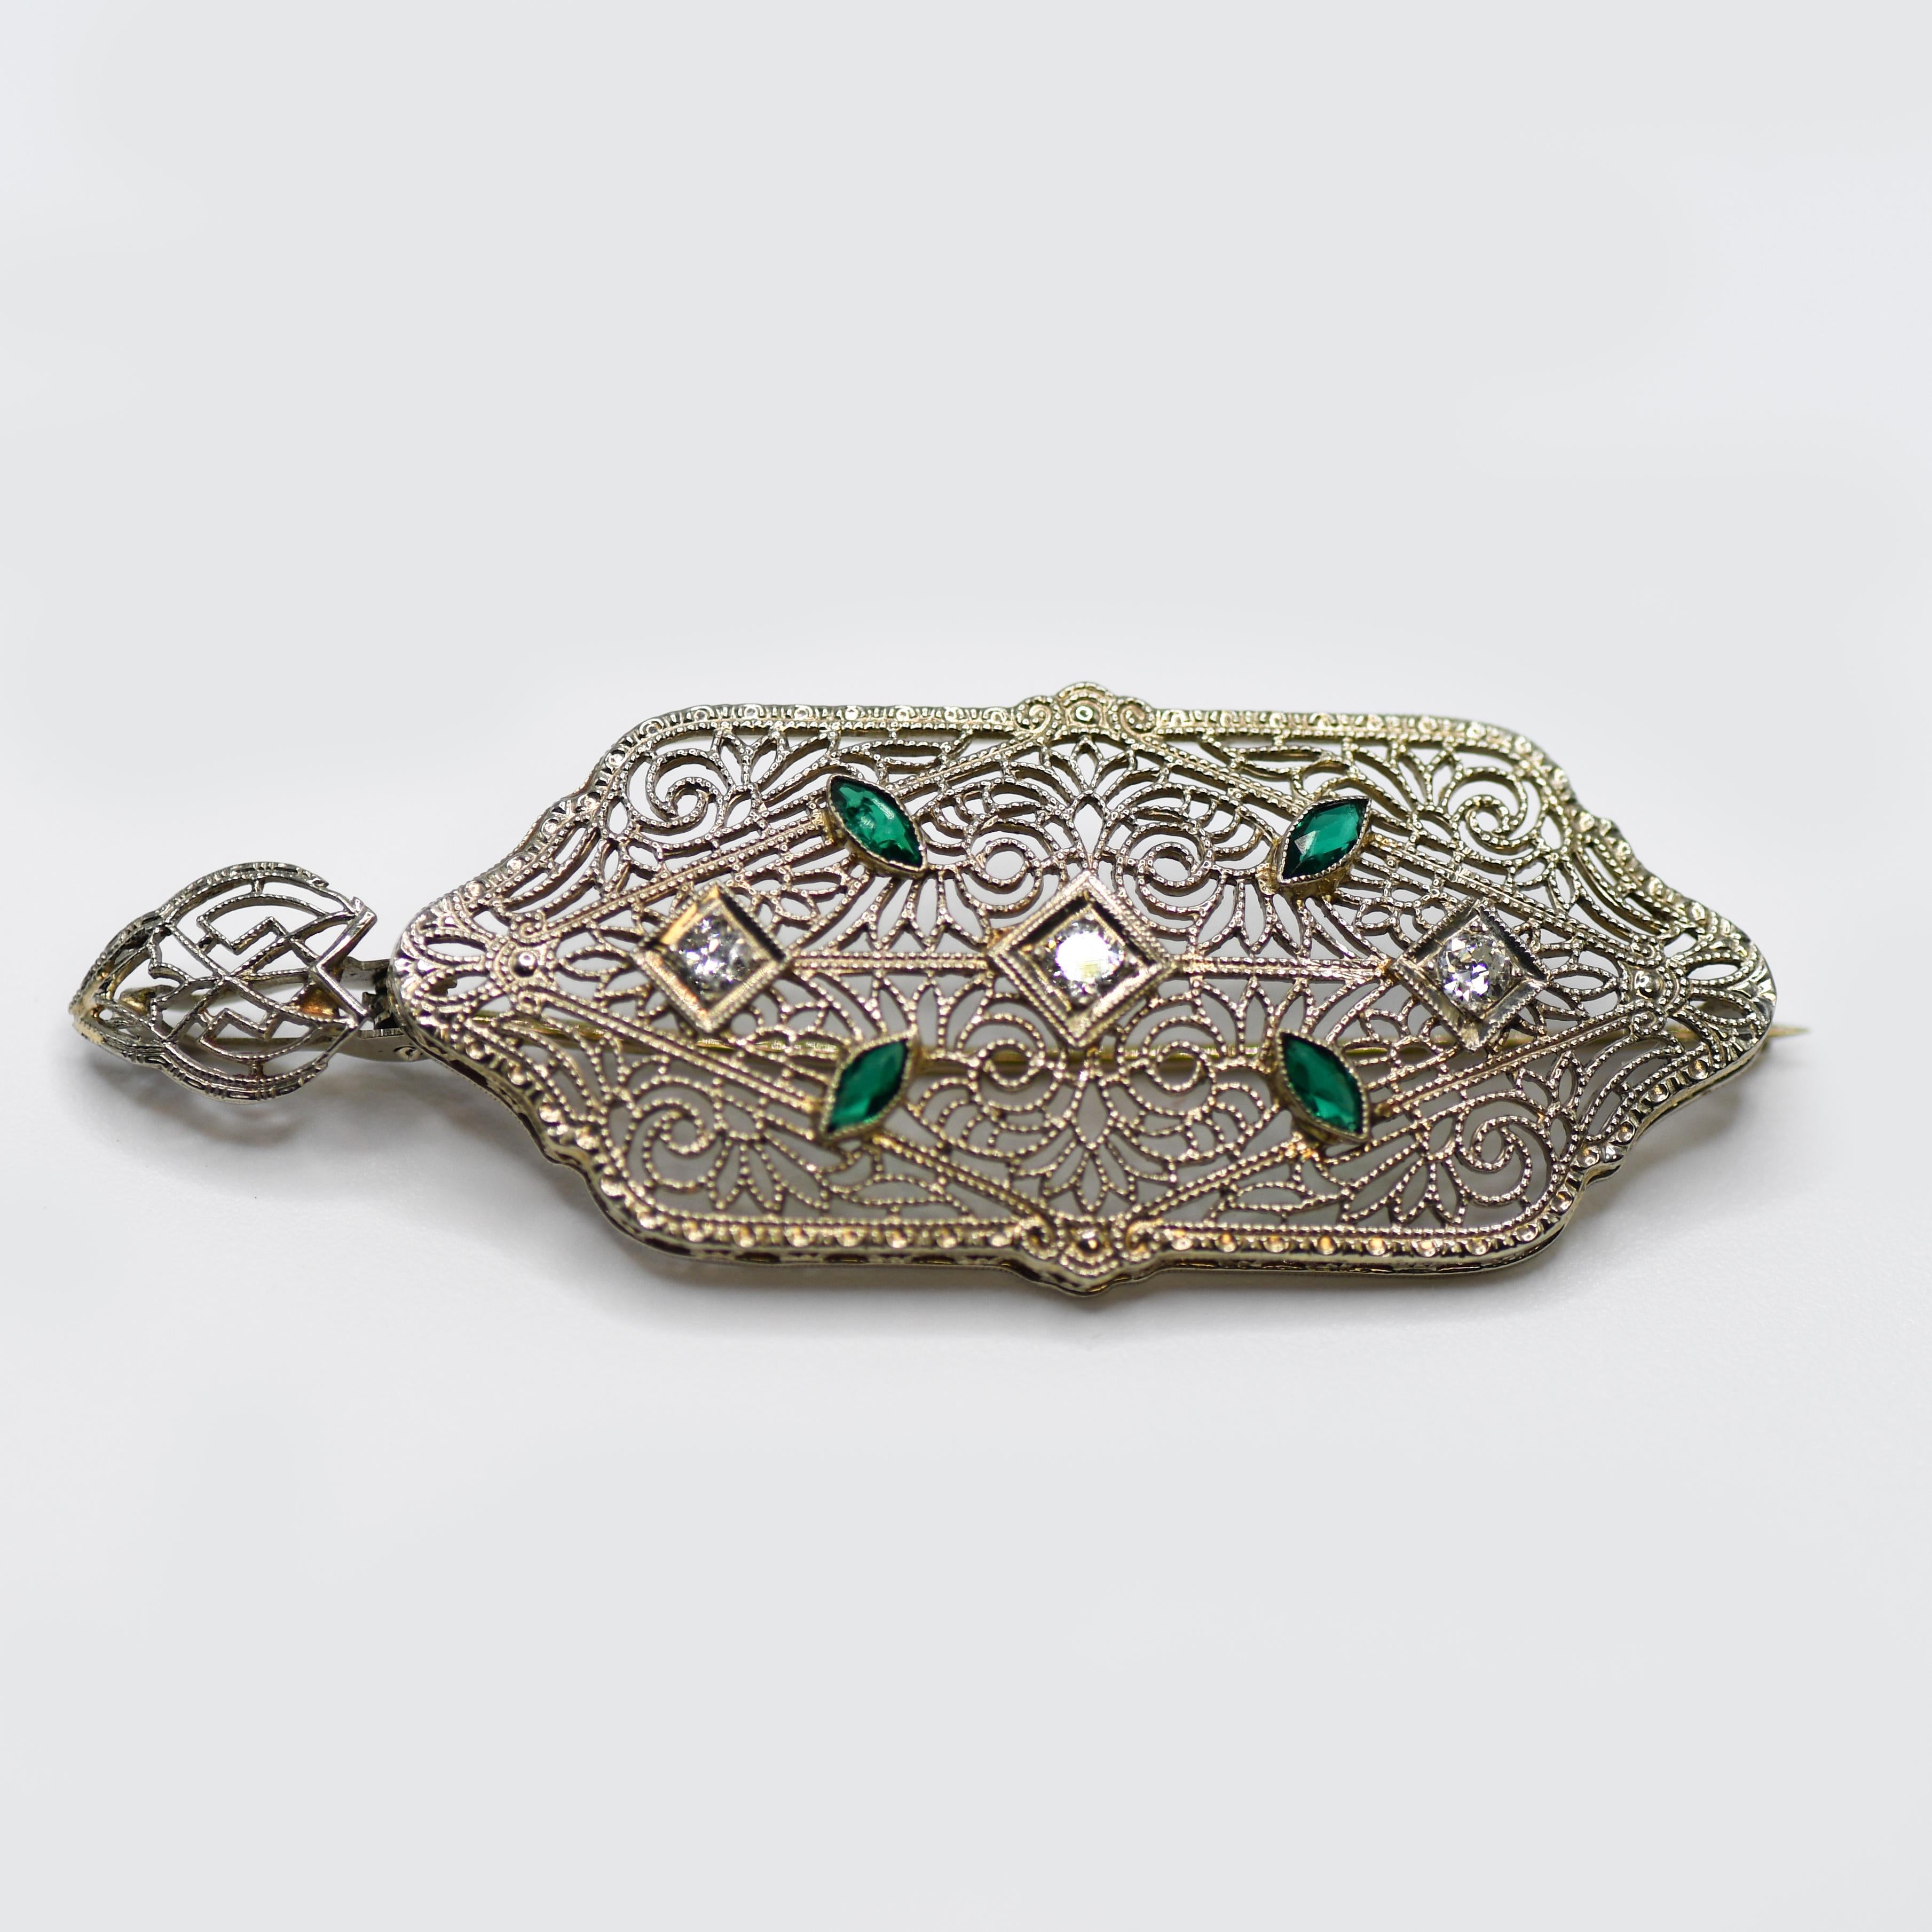 Art Deco brooch and pendant in 14k white gold setting.
Stamped 14k on the hinge and weighs 4.7 grams.
There are three round-transition cut diamonds, .20 total carats, i, j, k color range, Vs to Si clarity.
Also, there are four marquise shape green